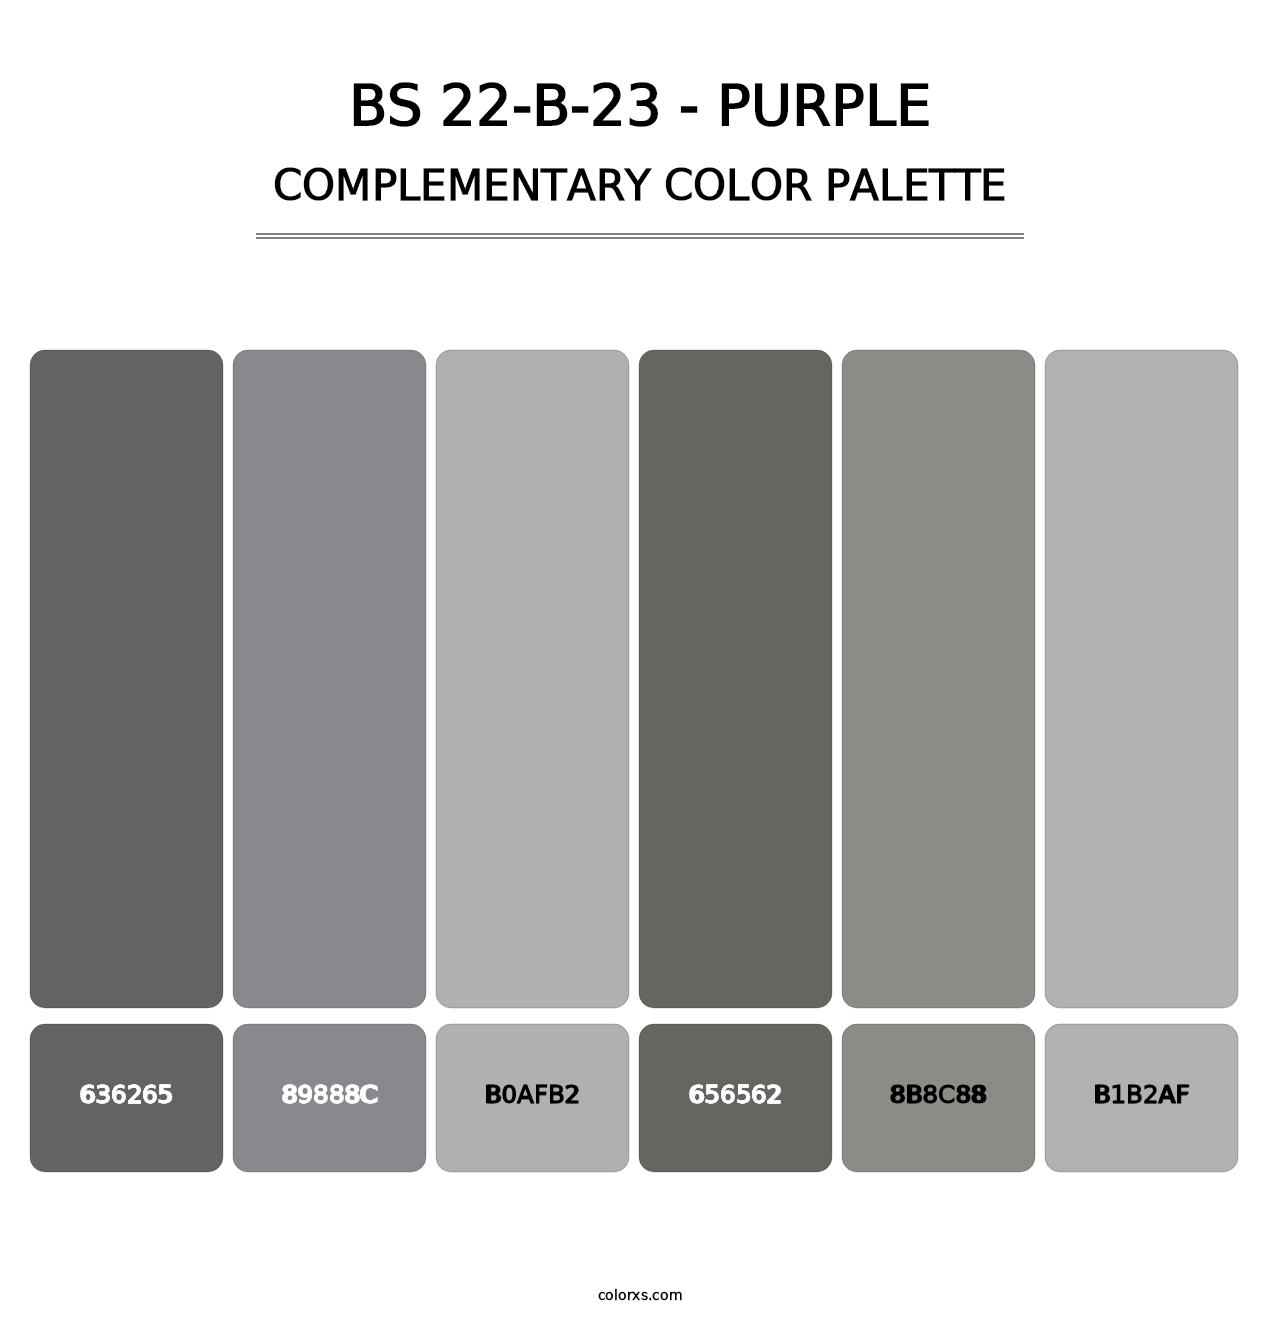 BS 22-B-23 - Purple - Complementary Color Palette